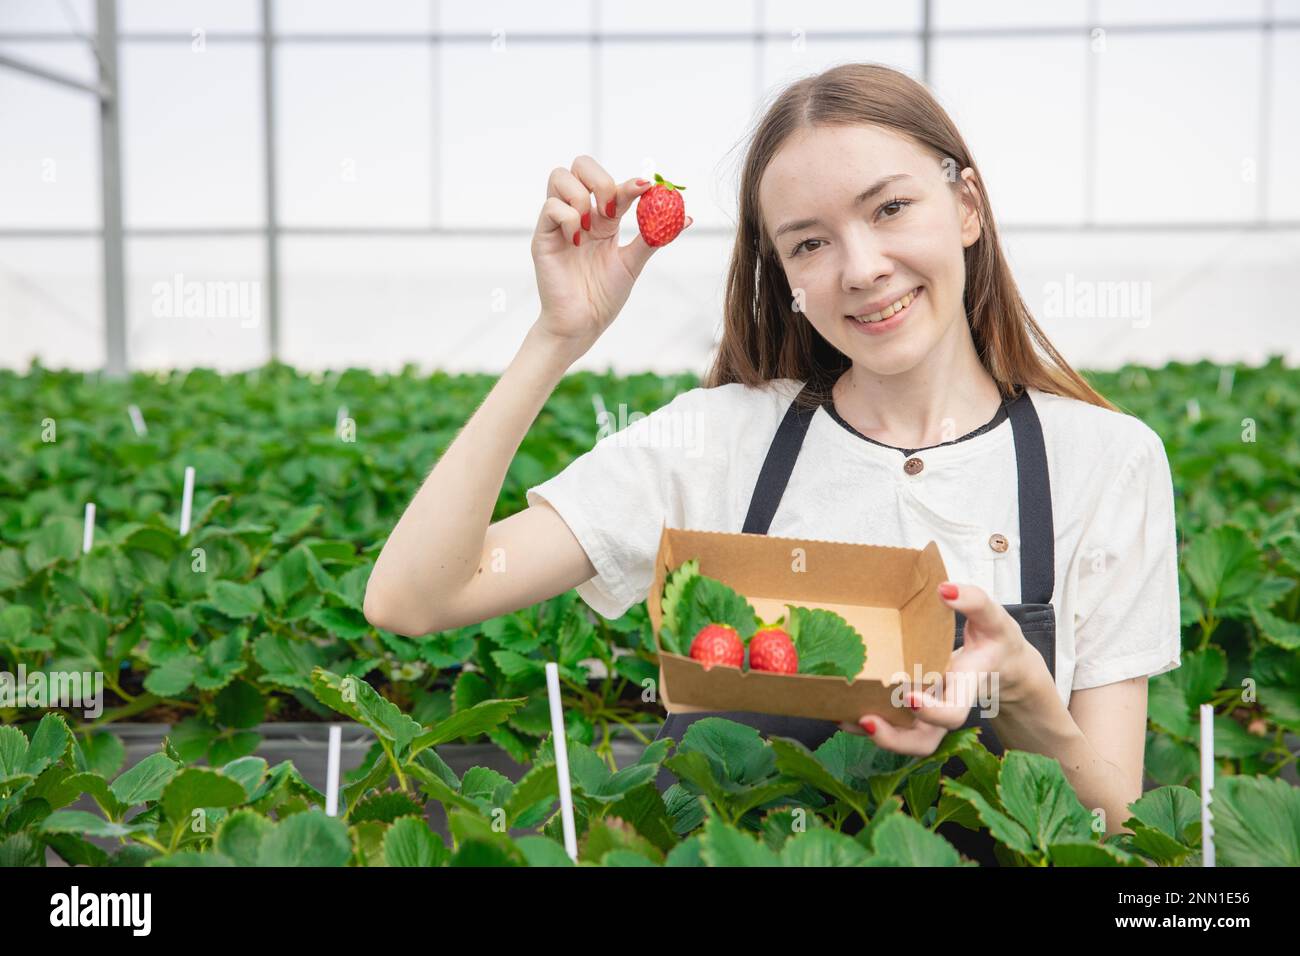 girl teen farmer showing big red fresh sweet strawberry fruit from indoor green house organic farm Stock Photo